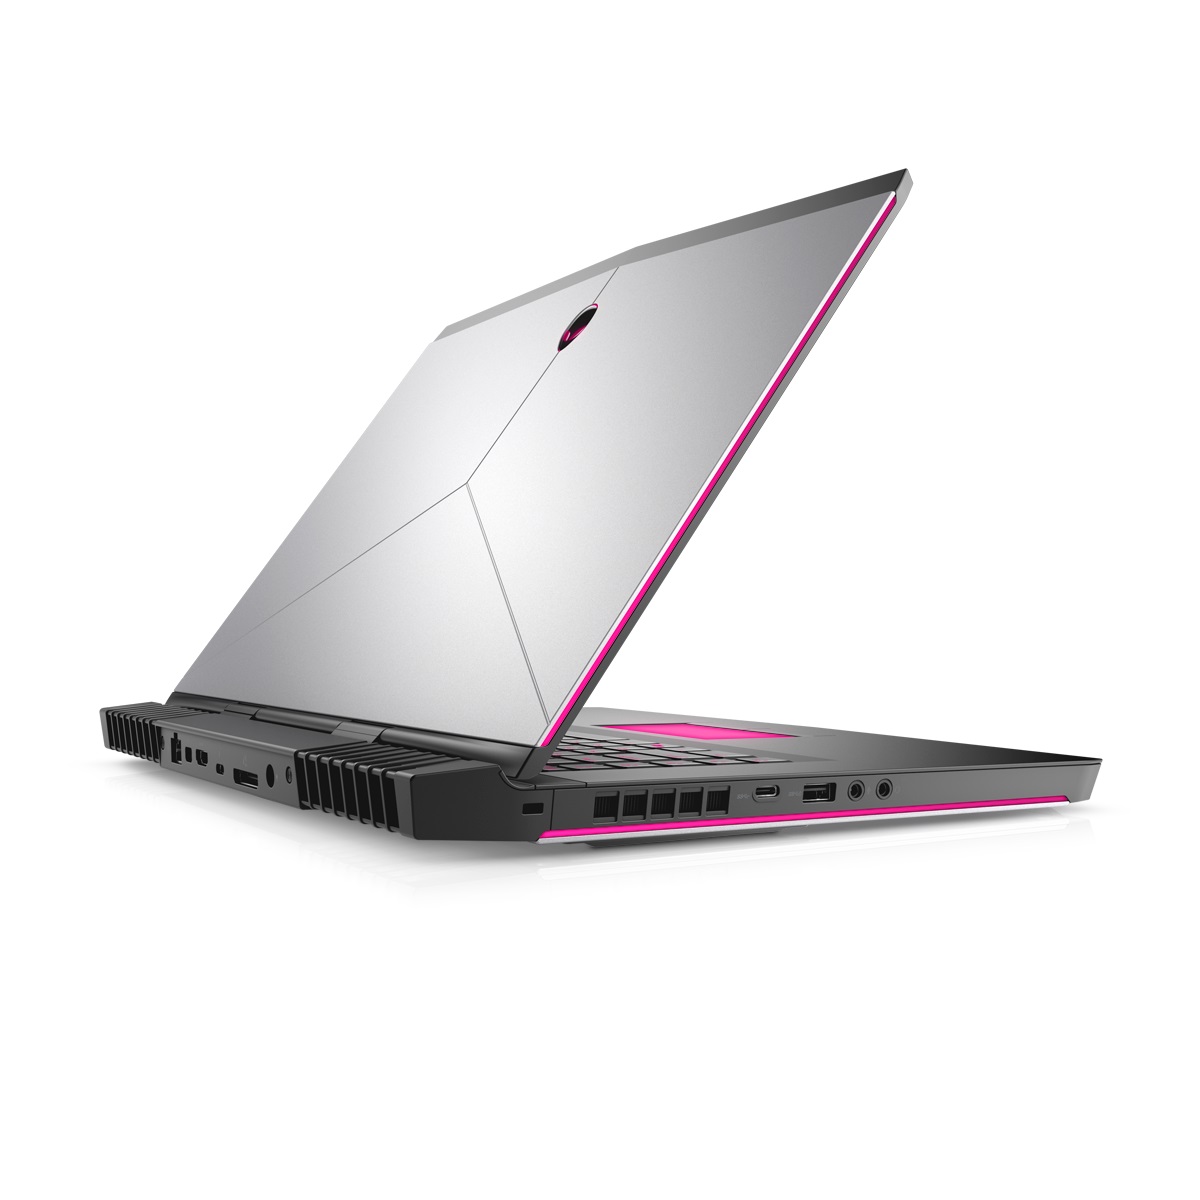 Alienware will offer the new GeForce® GTX 1080 with Max-Q technology starting June 27 with their award-winning Alienware 15 notebook.